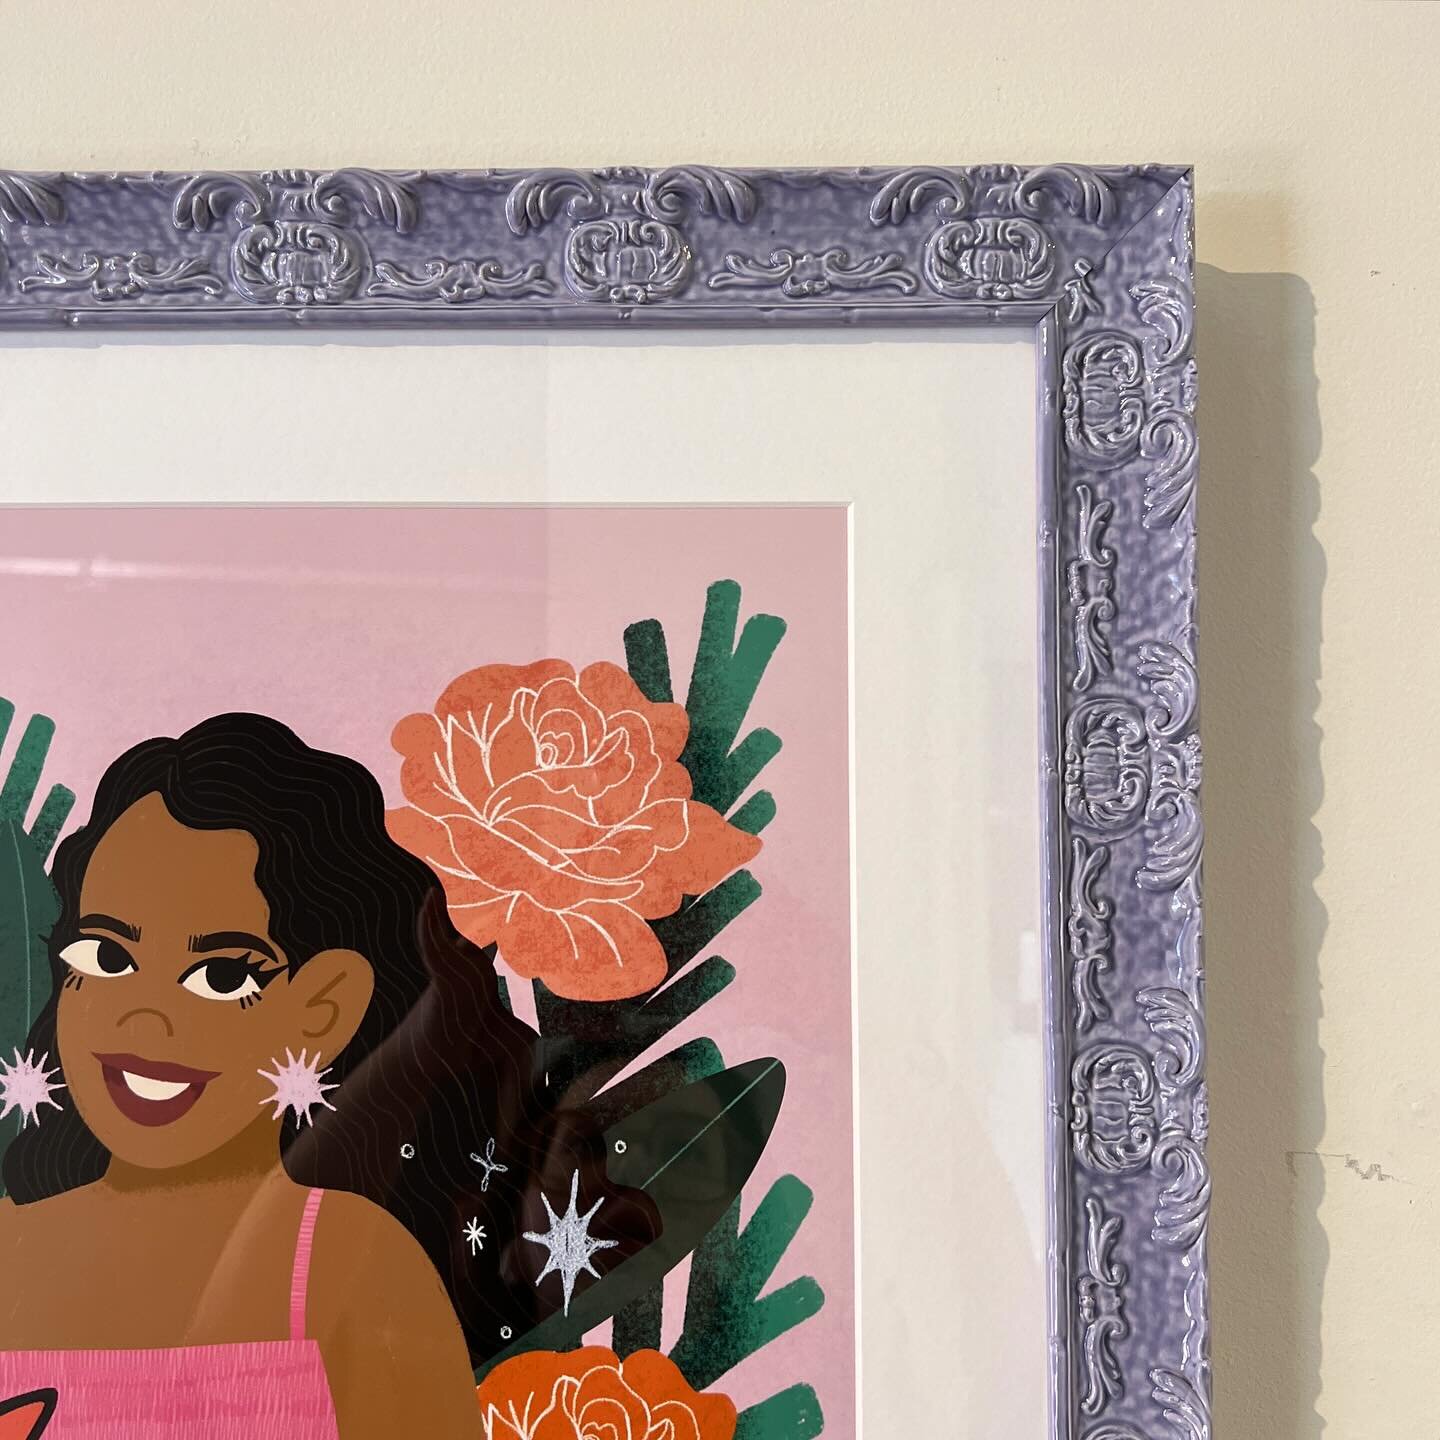 A gorgeous print from @dtheartista framed in this lilac lacquered frame from @romamoulding 💐